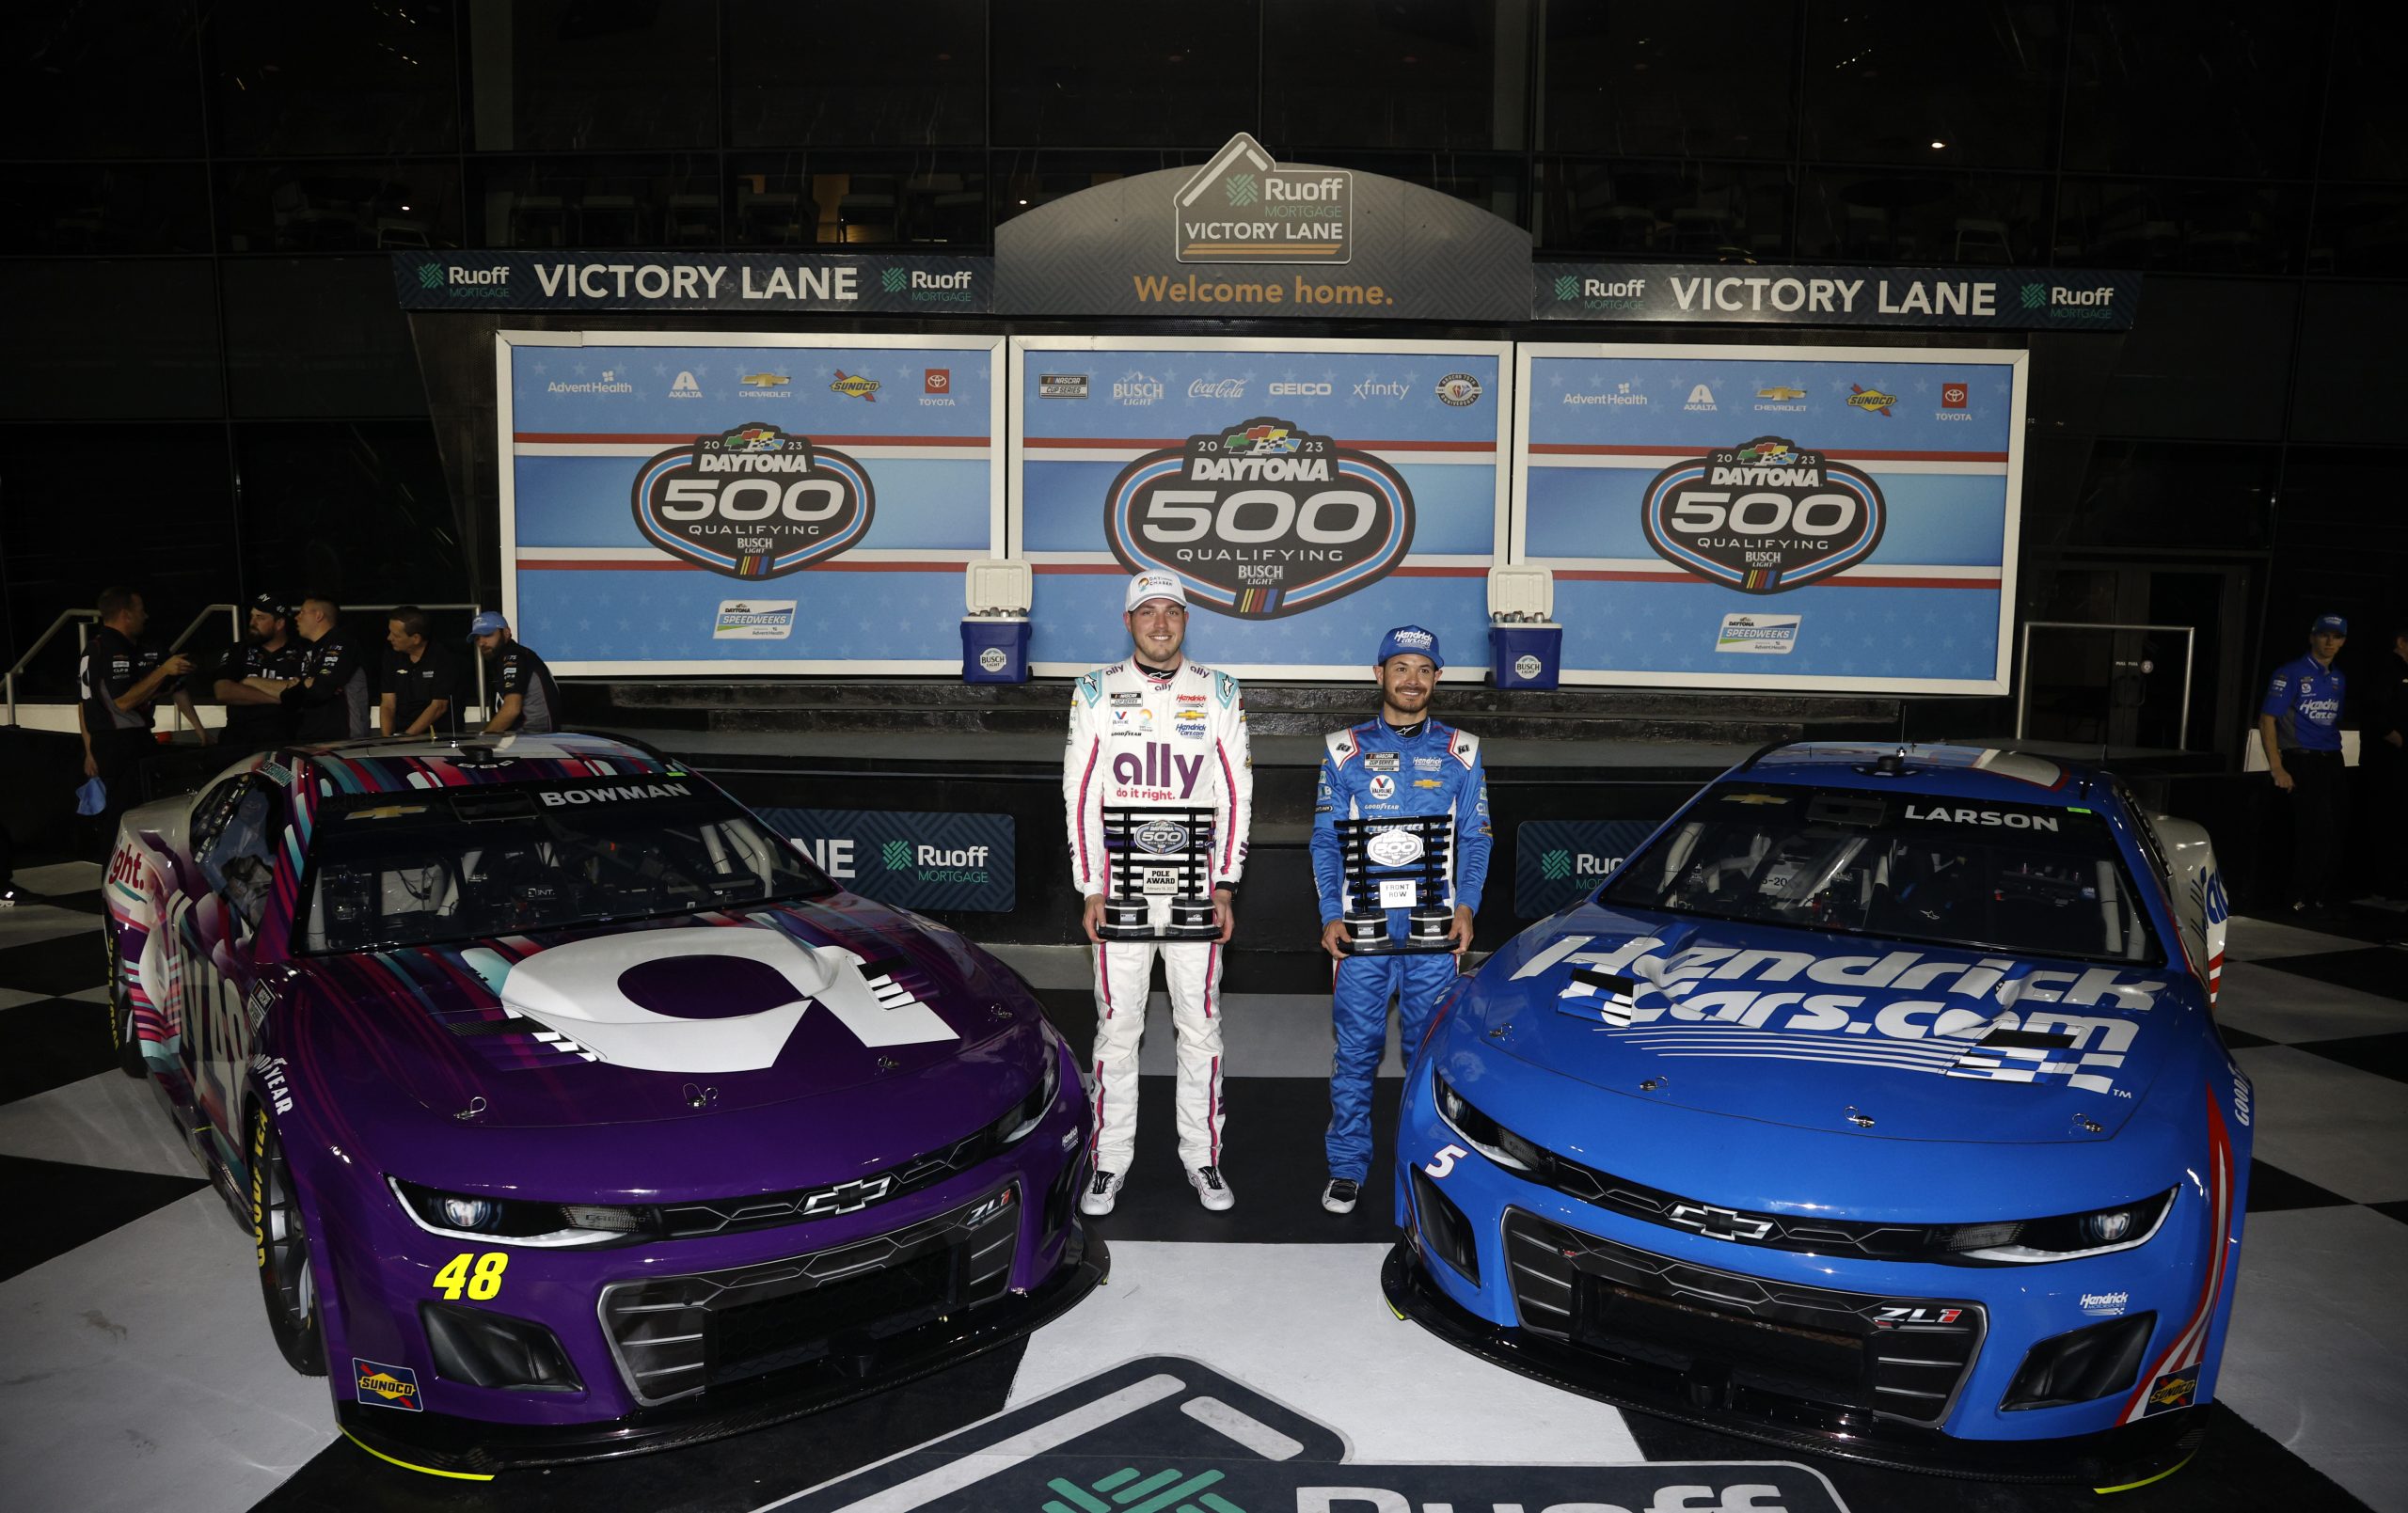 DAYTONA BEACH, FLORIDA - FEBRUARY 15: Pole Award winner, Alex Bowman, driver of the #48 Ally Chevrolet, (L) and Front Row winner, Kyle Larson, driver of the #5 HendrickCars.com Chevrolet, pose for photos after the the Busch Light Pole at Daytona International Speedway on February 15, 2023 in Daytona Beach, Florida. (Photo by Sean Gardner/Getty Images)